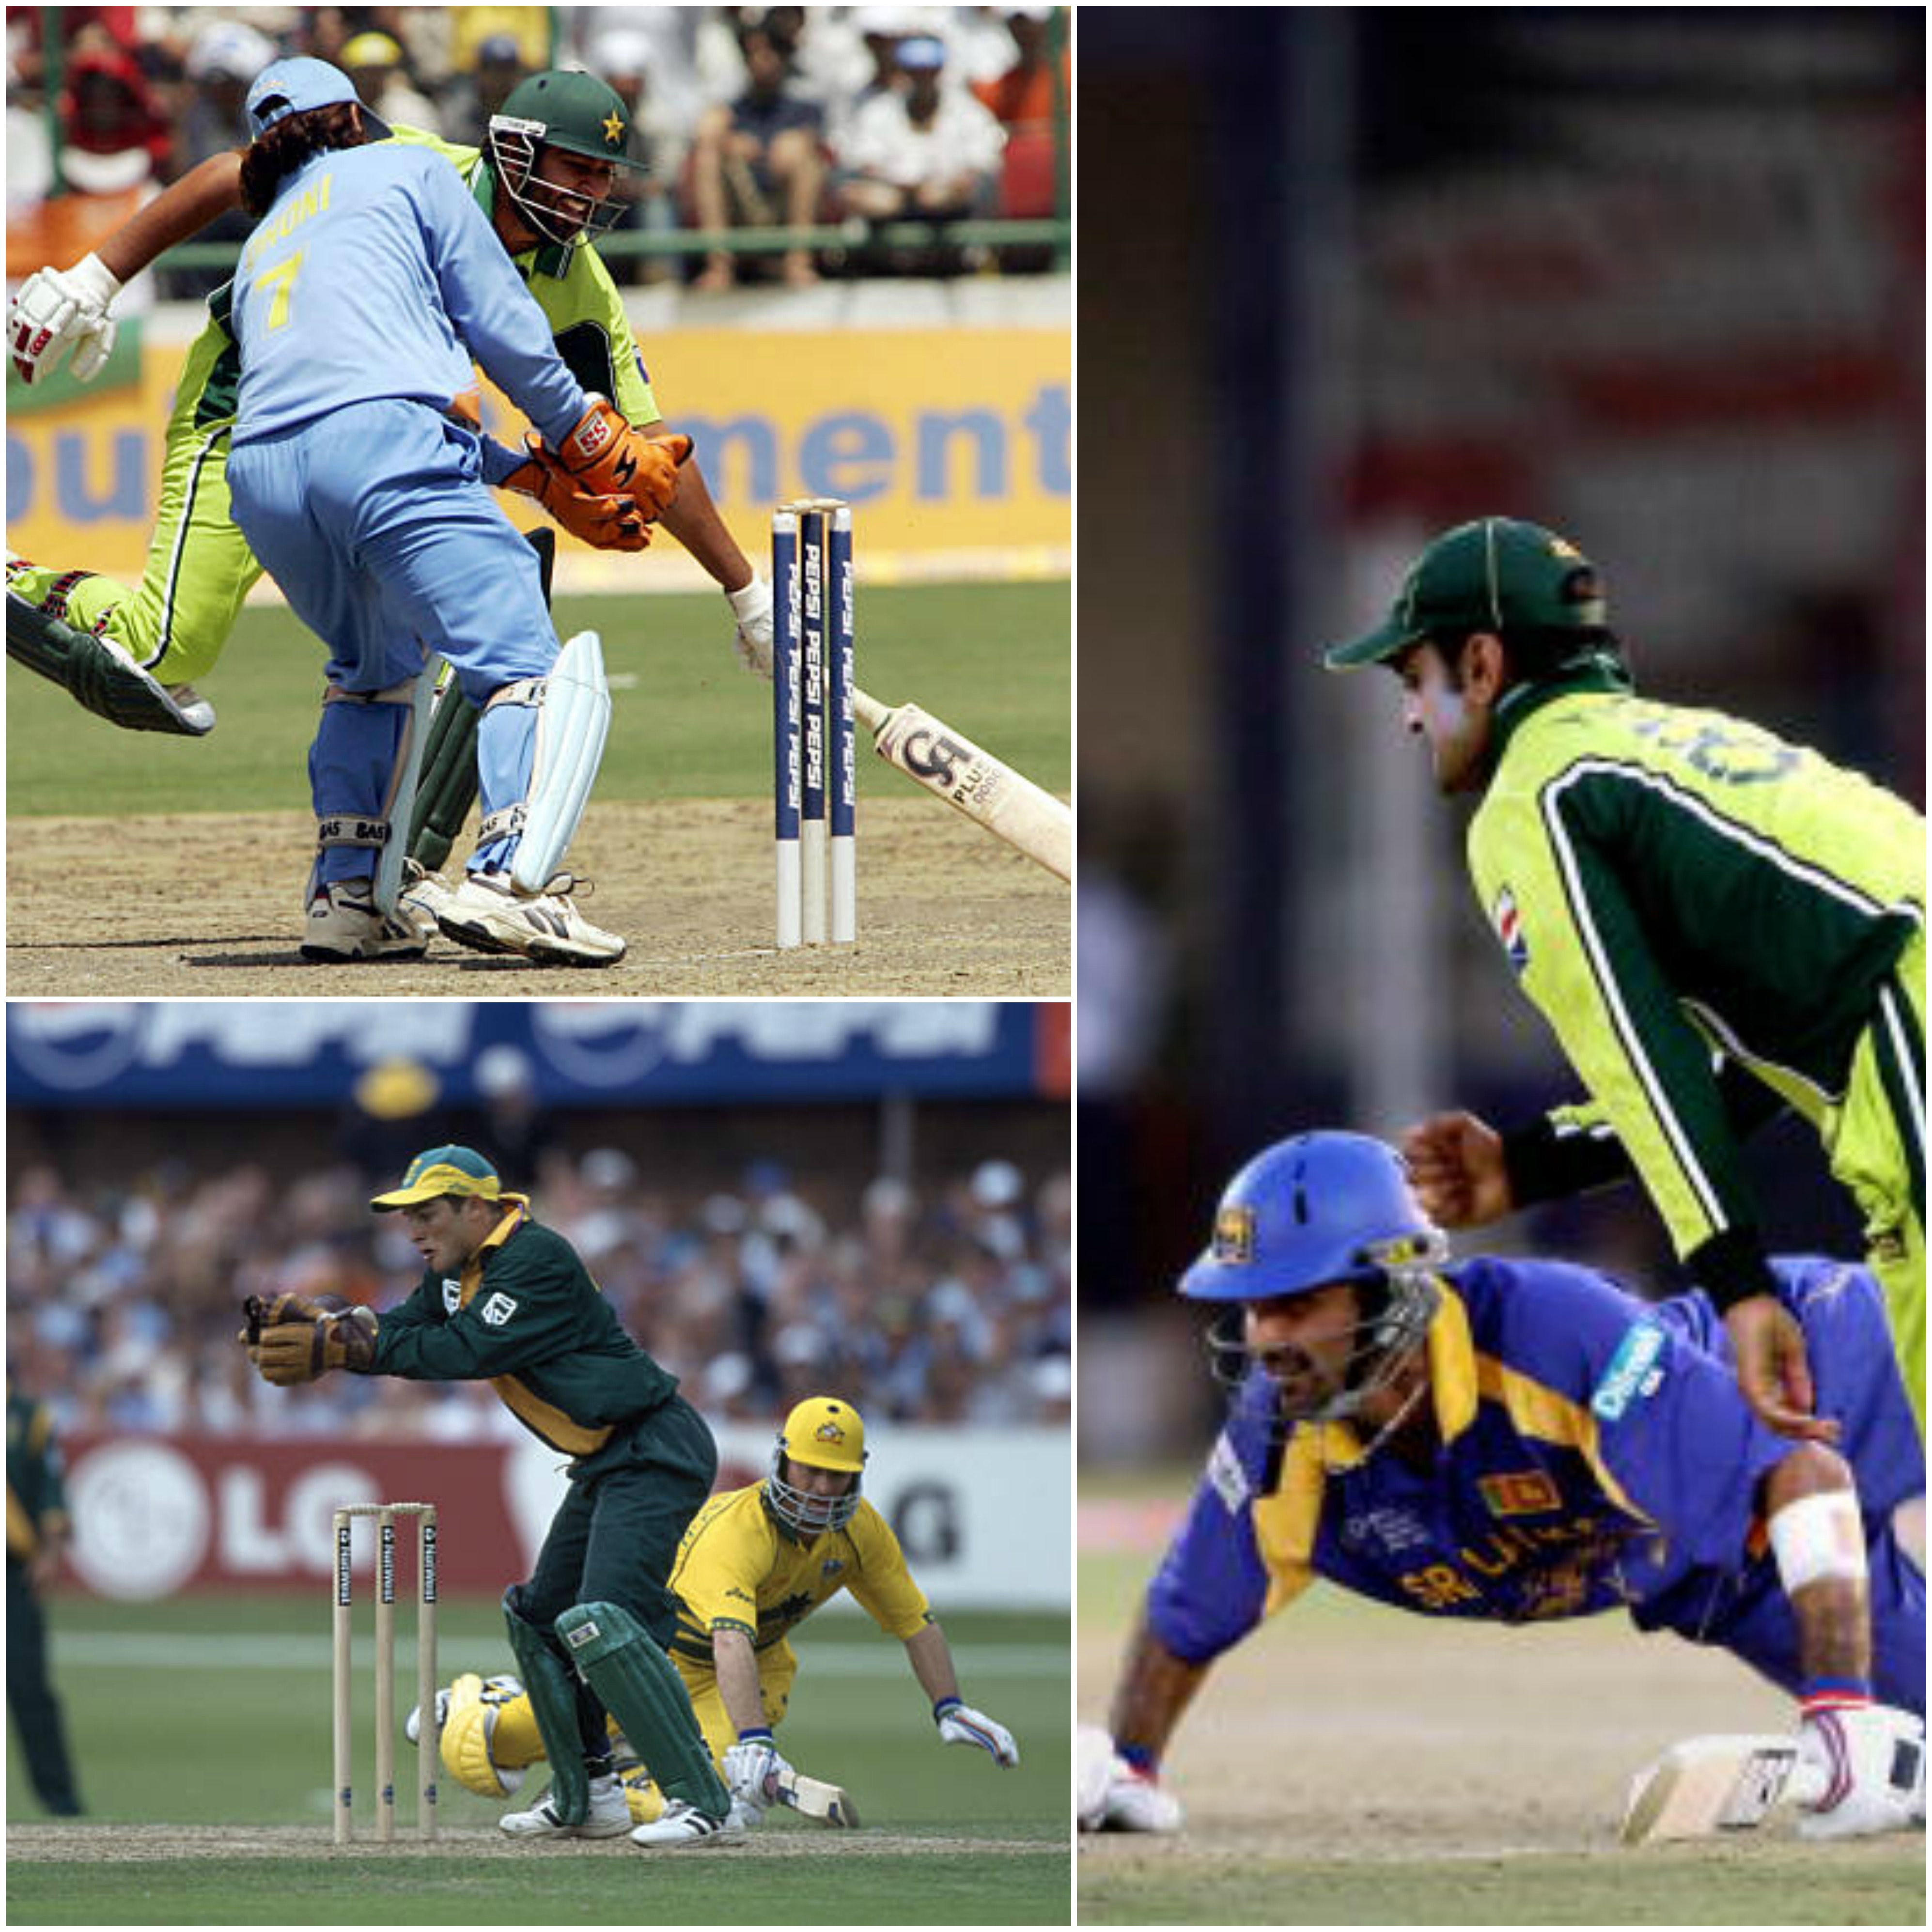 International cricketers who make poor record of most runout